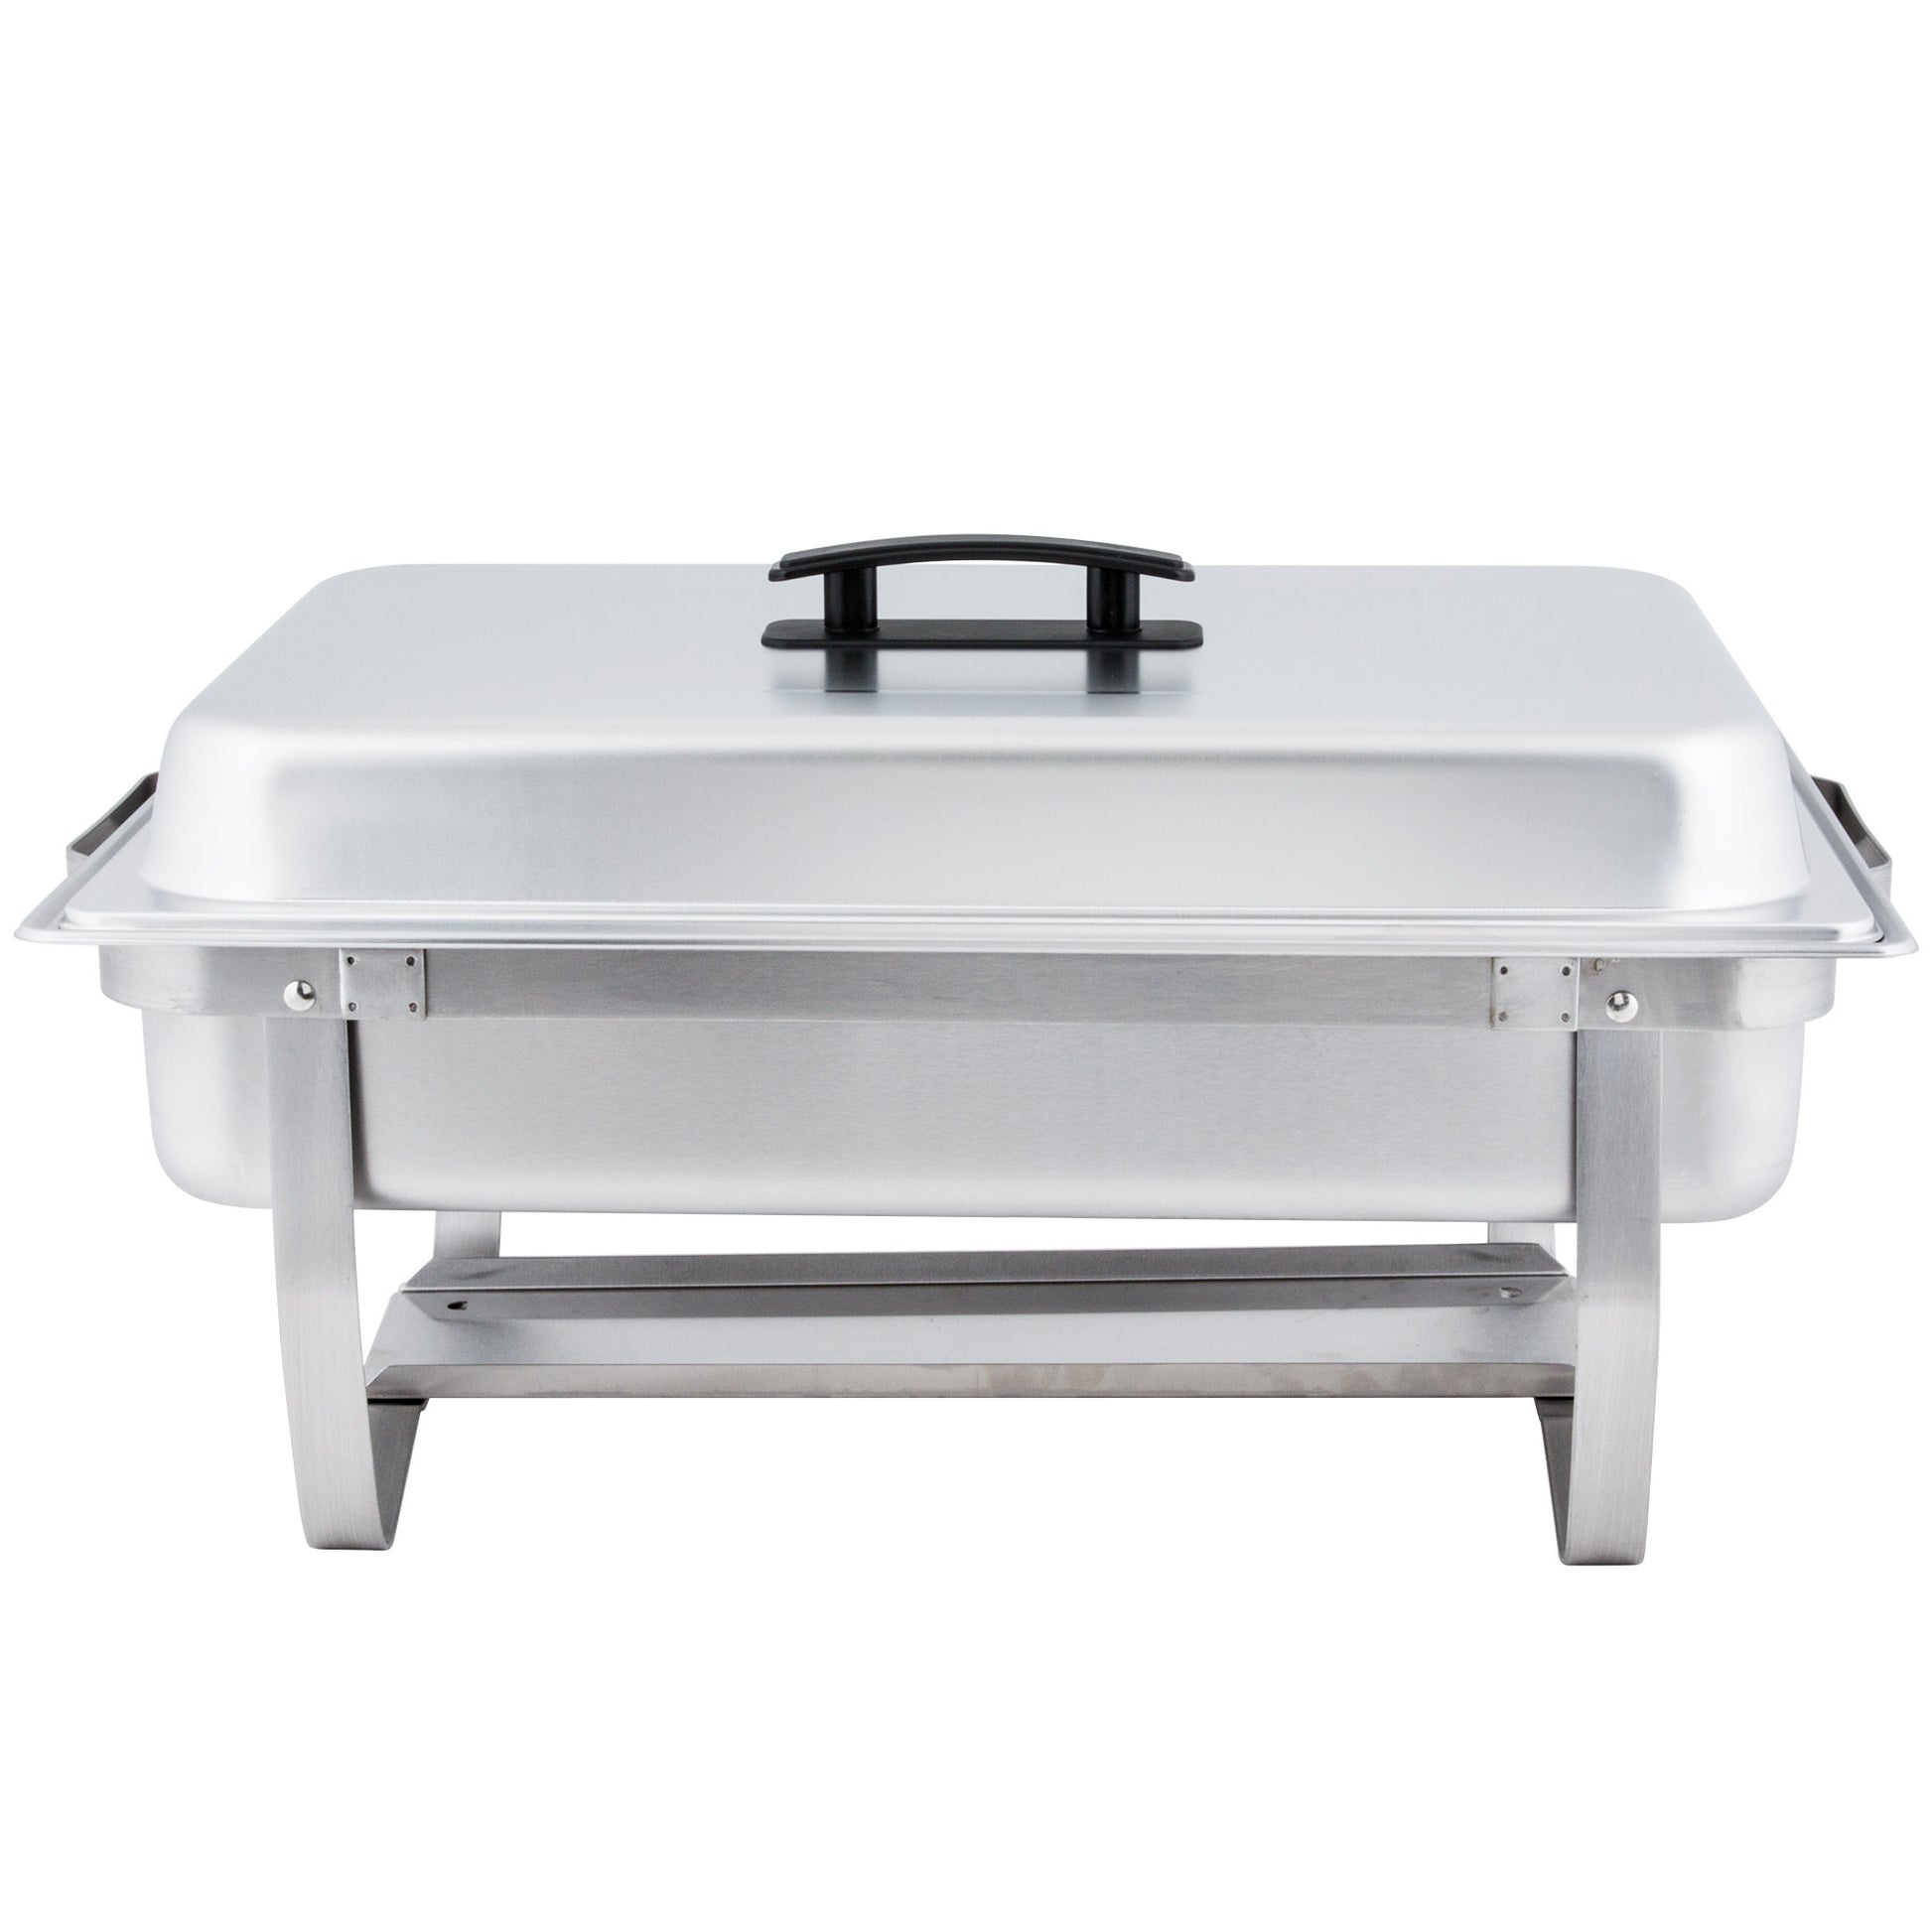 Party Food Warmer Buffet Stainless Steel Server with Collapsible frame-Free Item Online